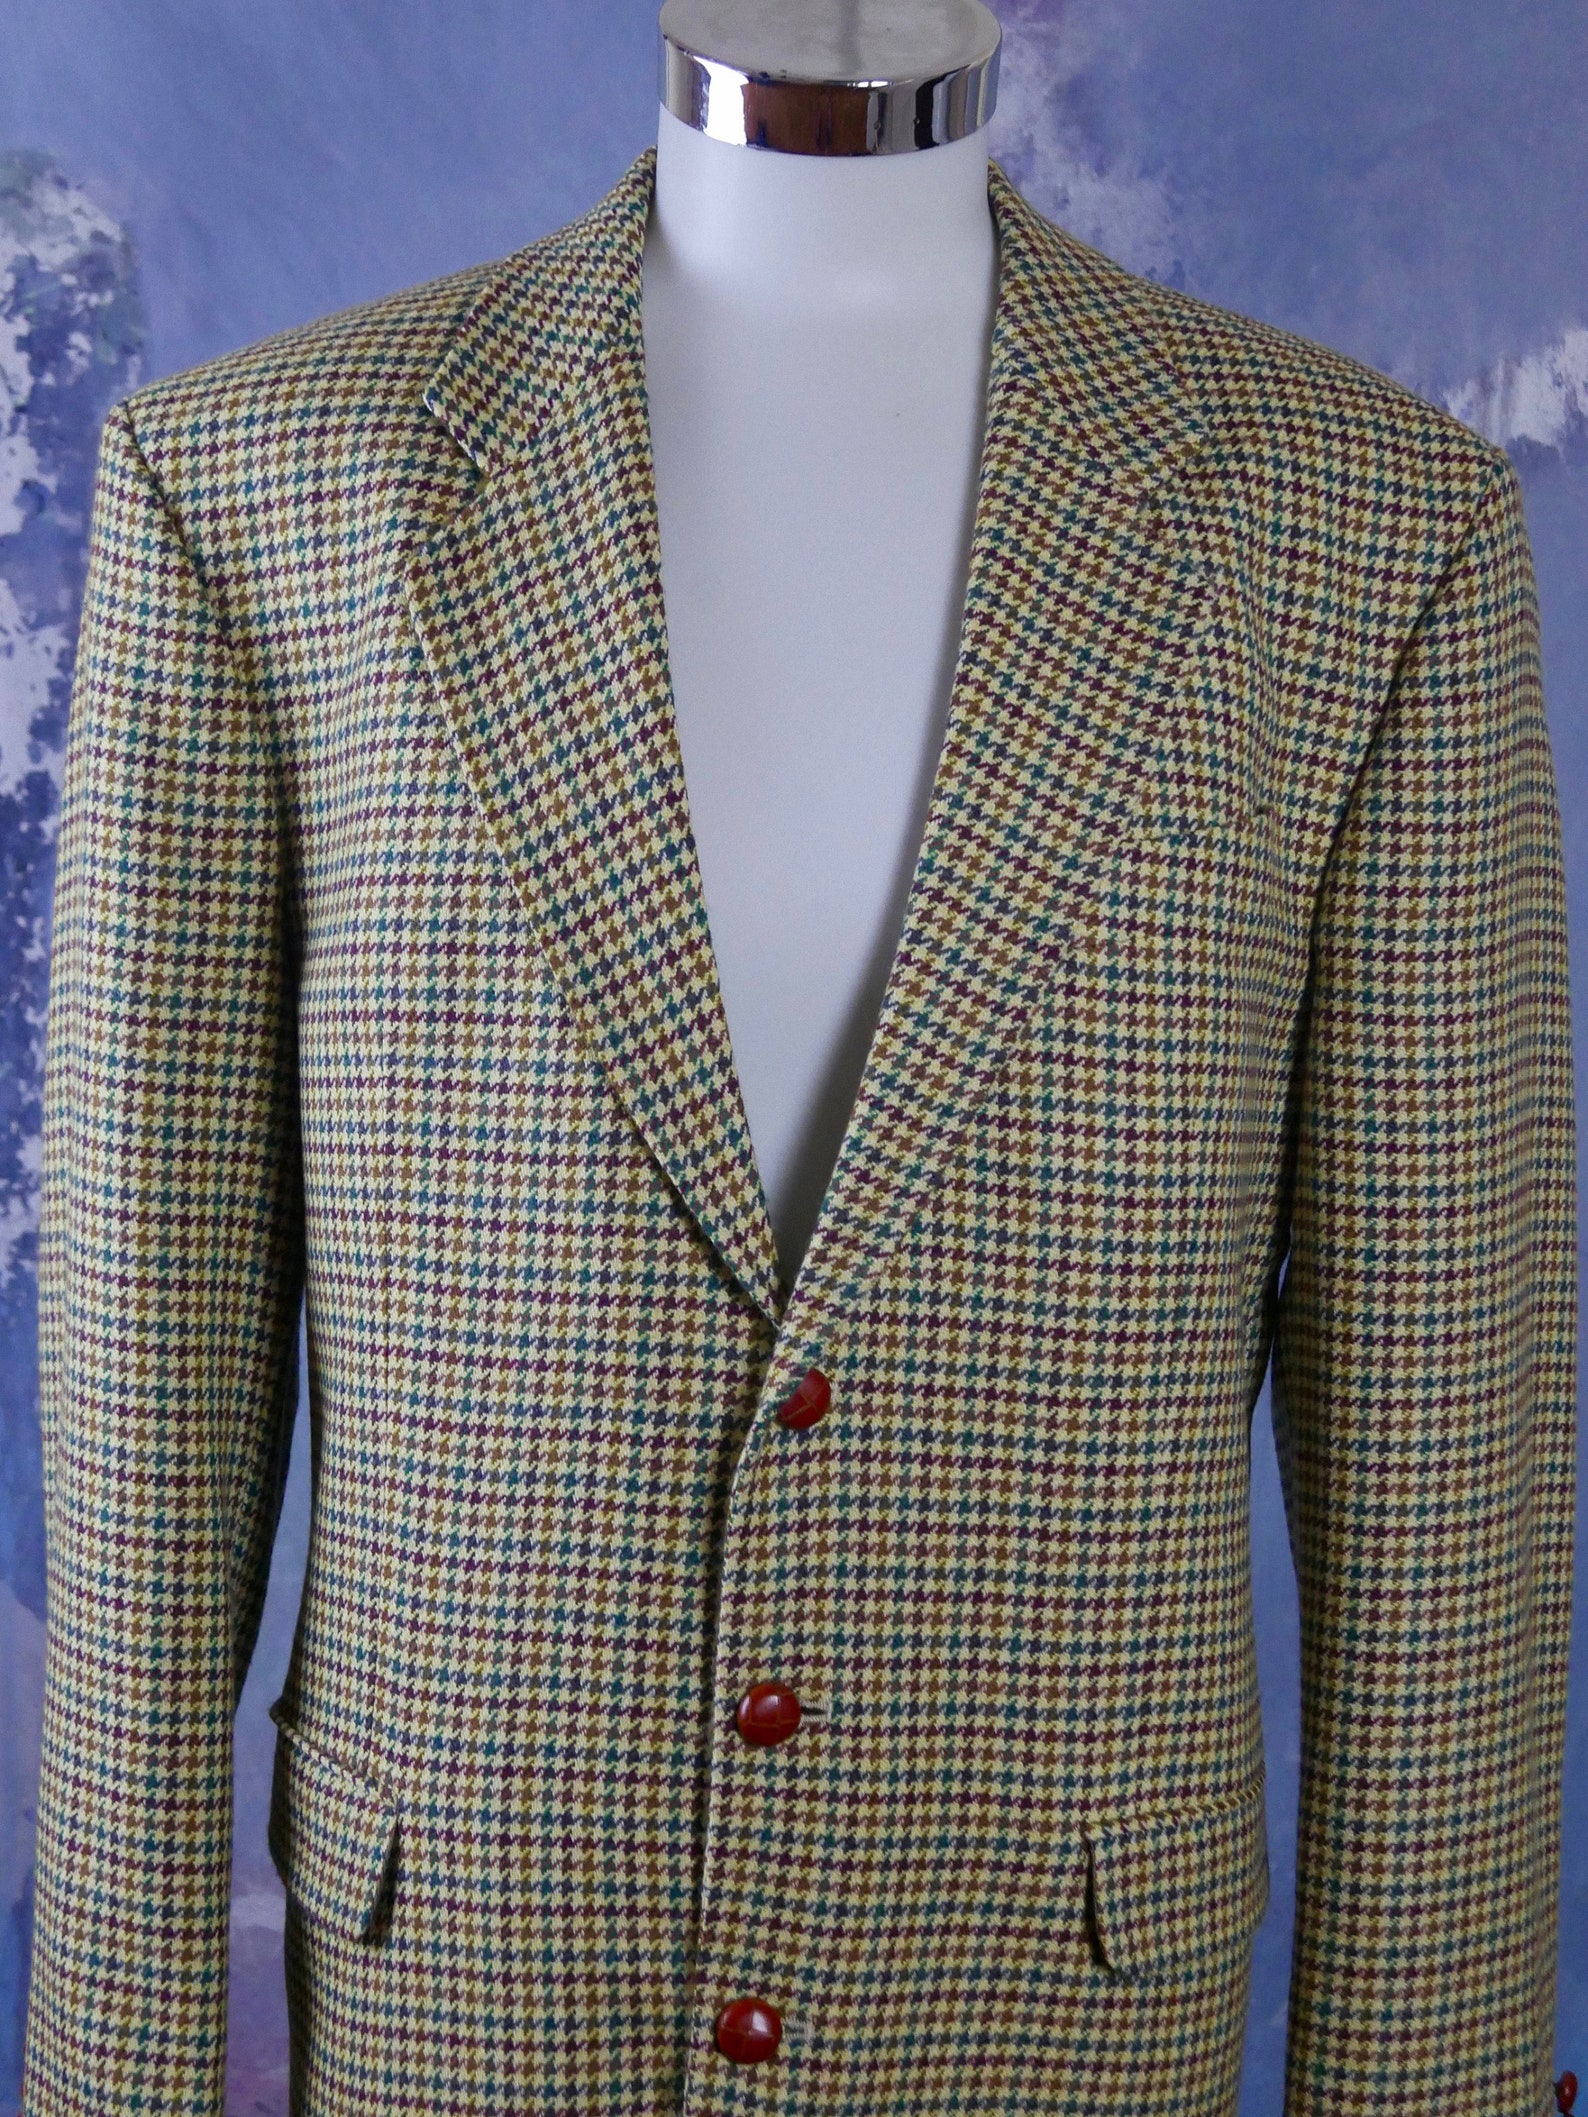 1980s Houndstooth Blazer Men's Single-breasted Pale | Etsy